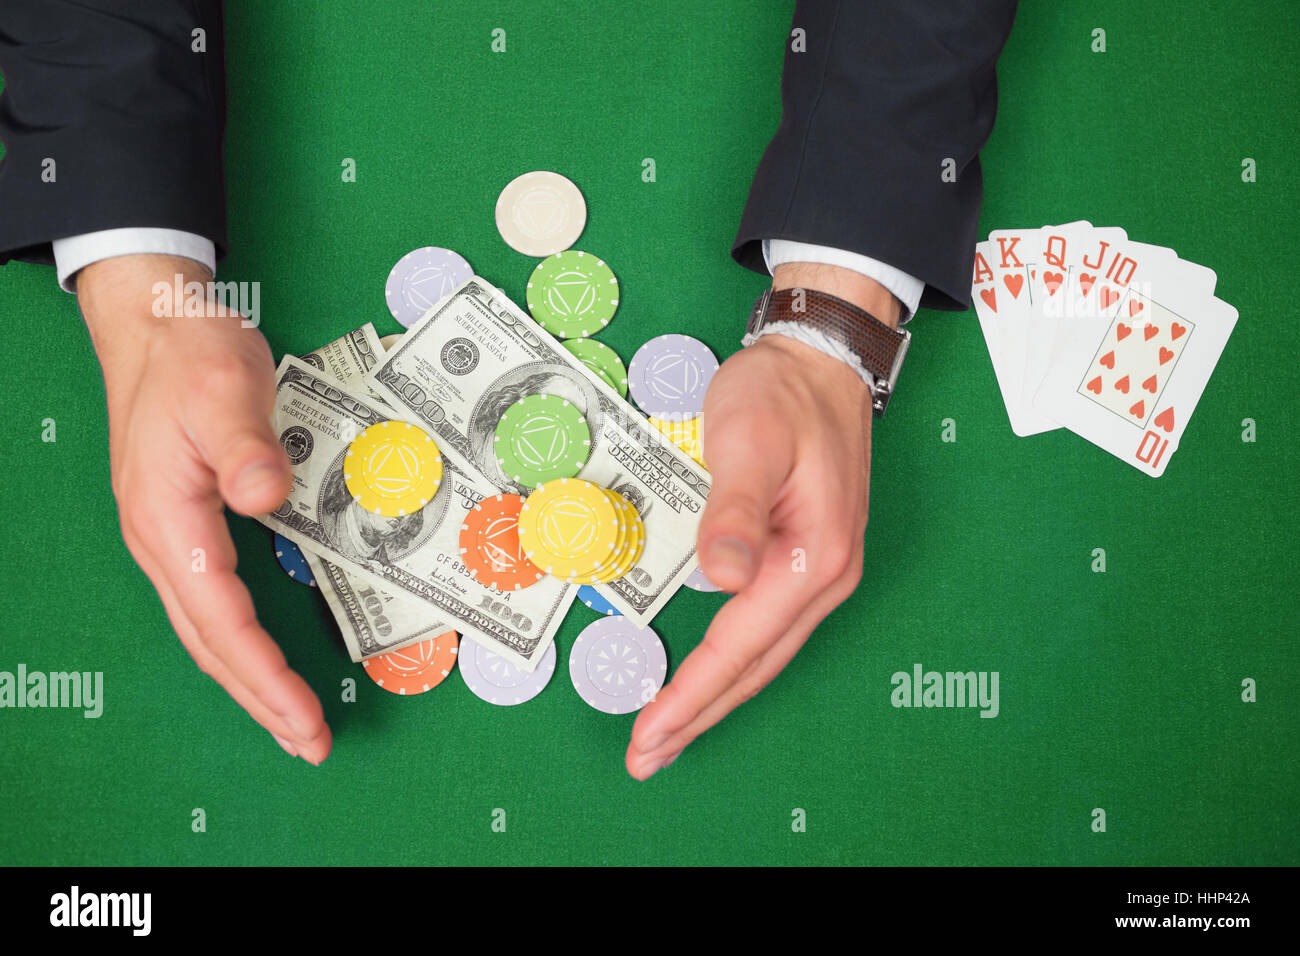 Hands grabbing dollars and chips from table beside royal flush in poker game Stock Photo